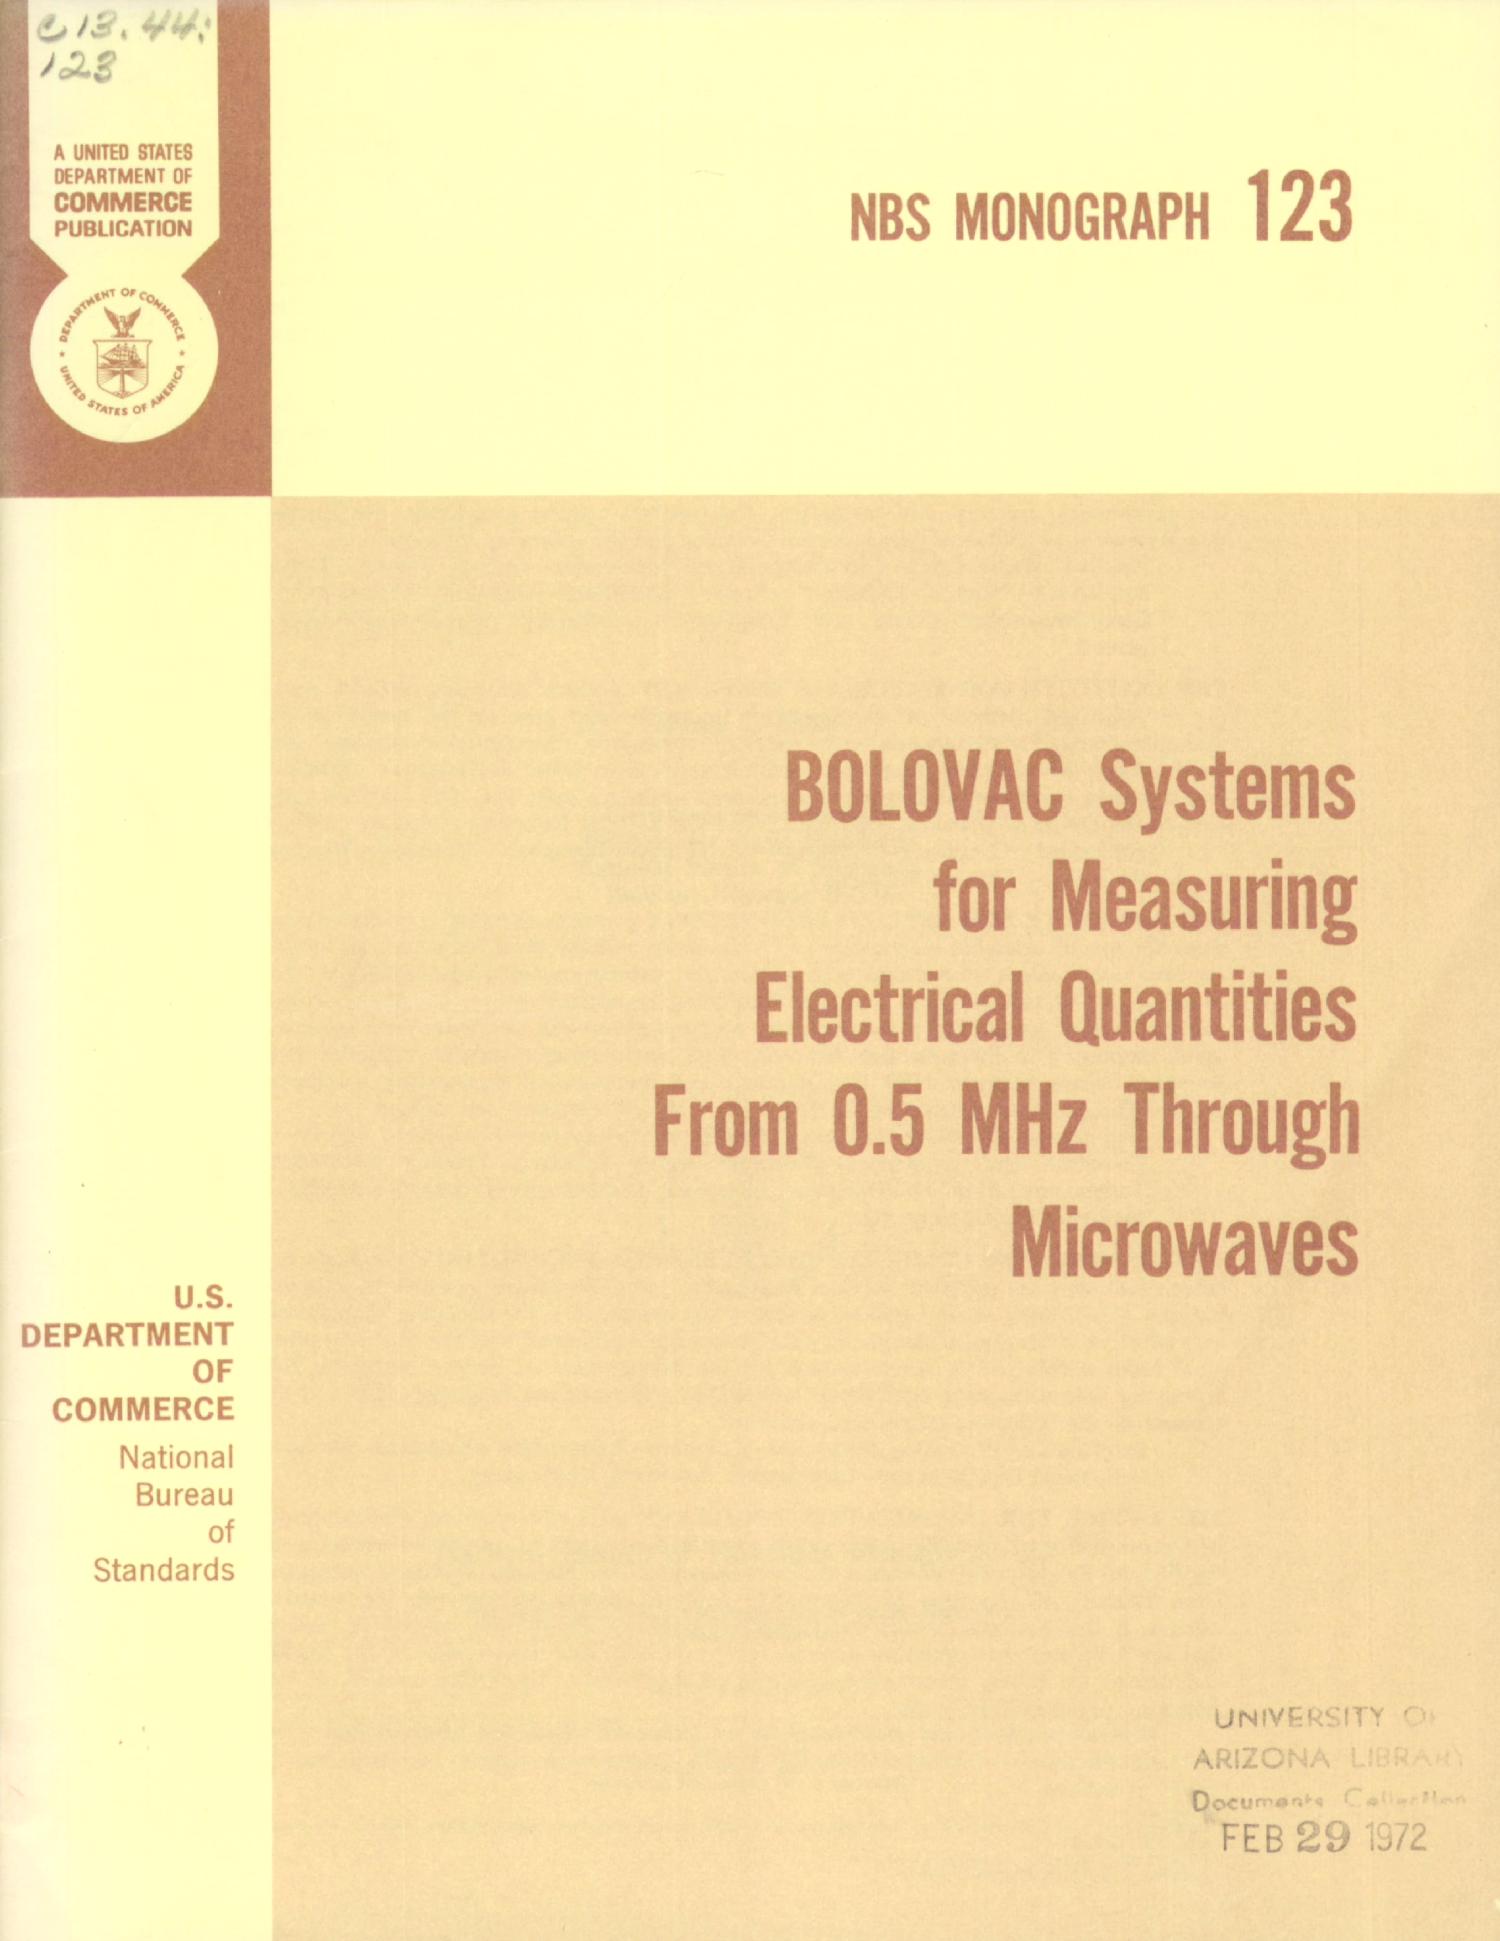 BOLOVAC Systems for Measuring Electrical Quantities From 0.5 MHz Through Microwaves
                                                
                                                    Front Cover
                                                